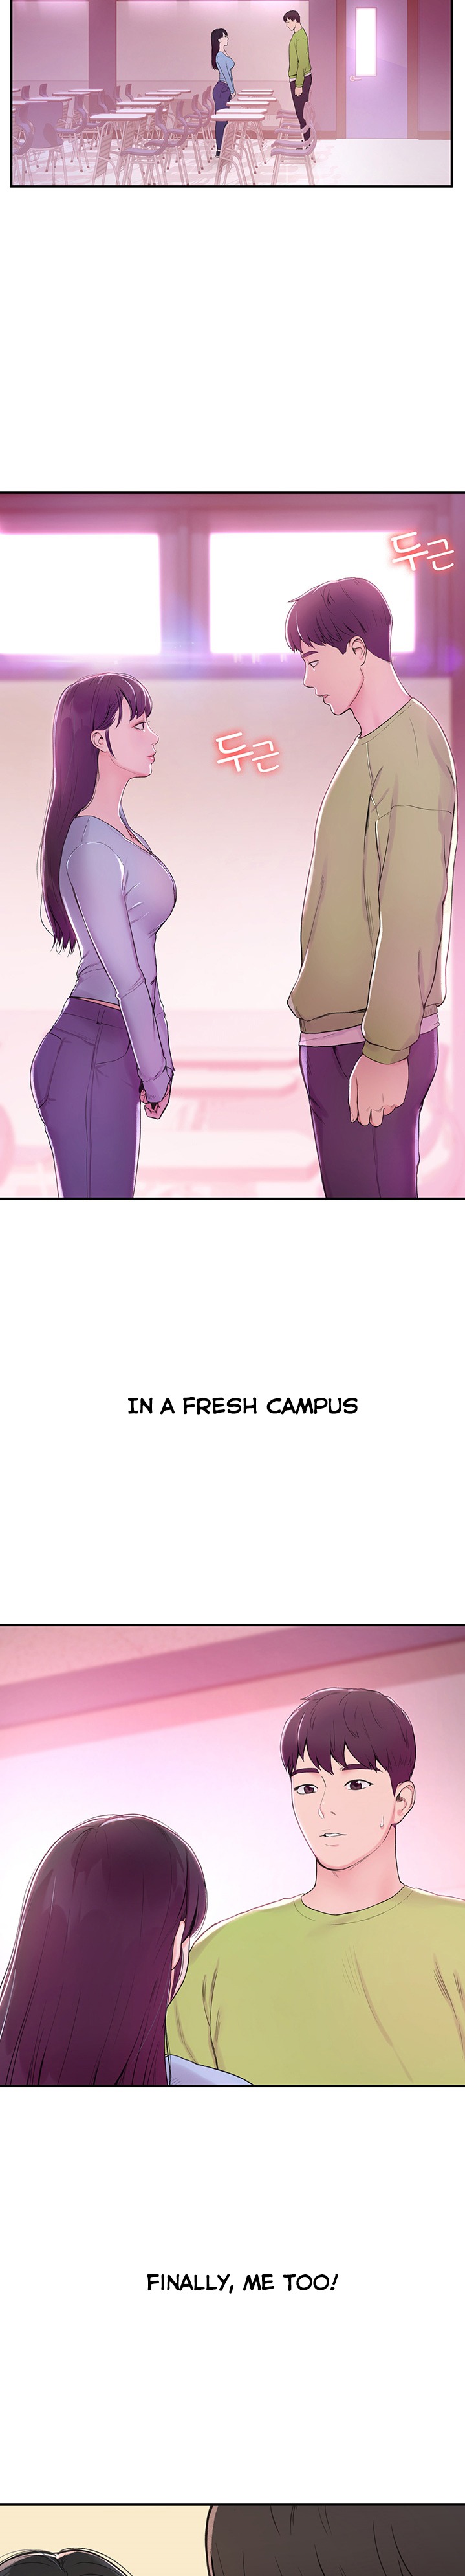 Campus Today - Chapter 1 Page 1